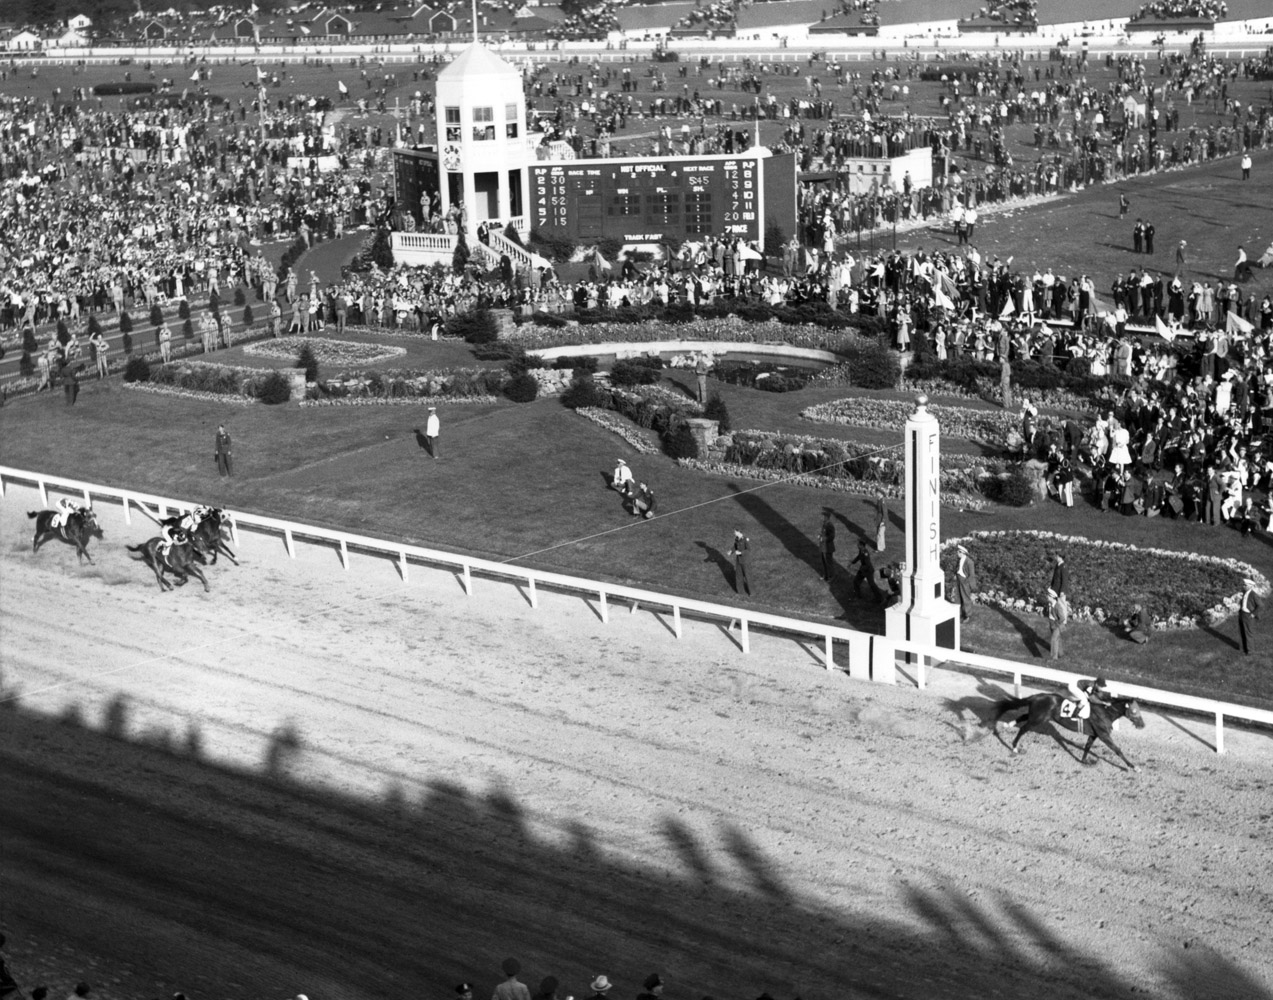 Aerial view of the finish in the 1941 Kentucky Derby, won by Whirlaway with Eddie Arcaro up (Churchill Downs Inc./Kinetic Corp. /Museum Collection)